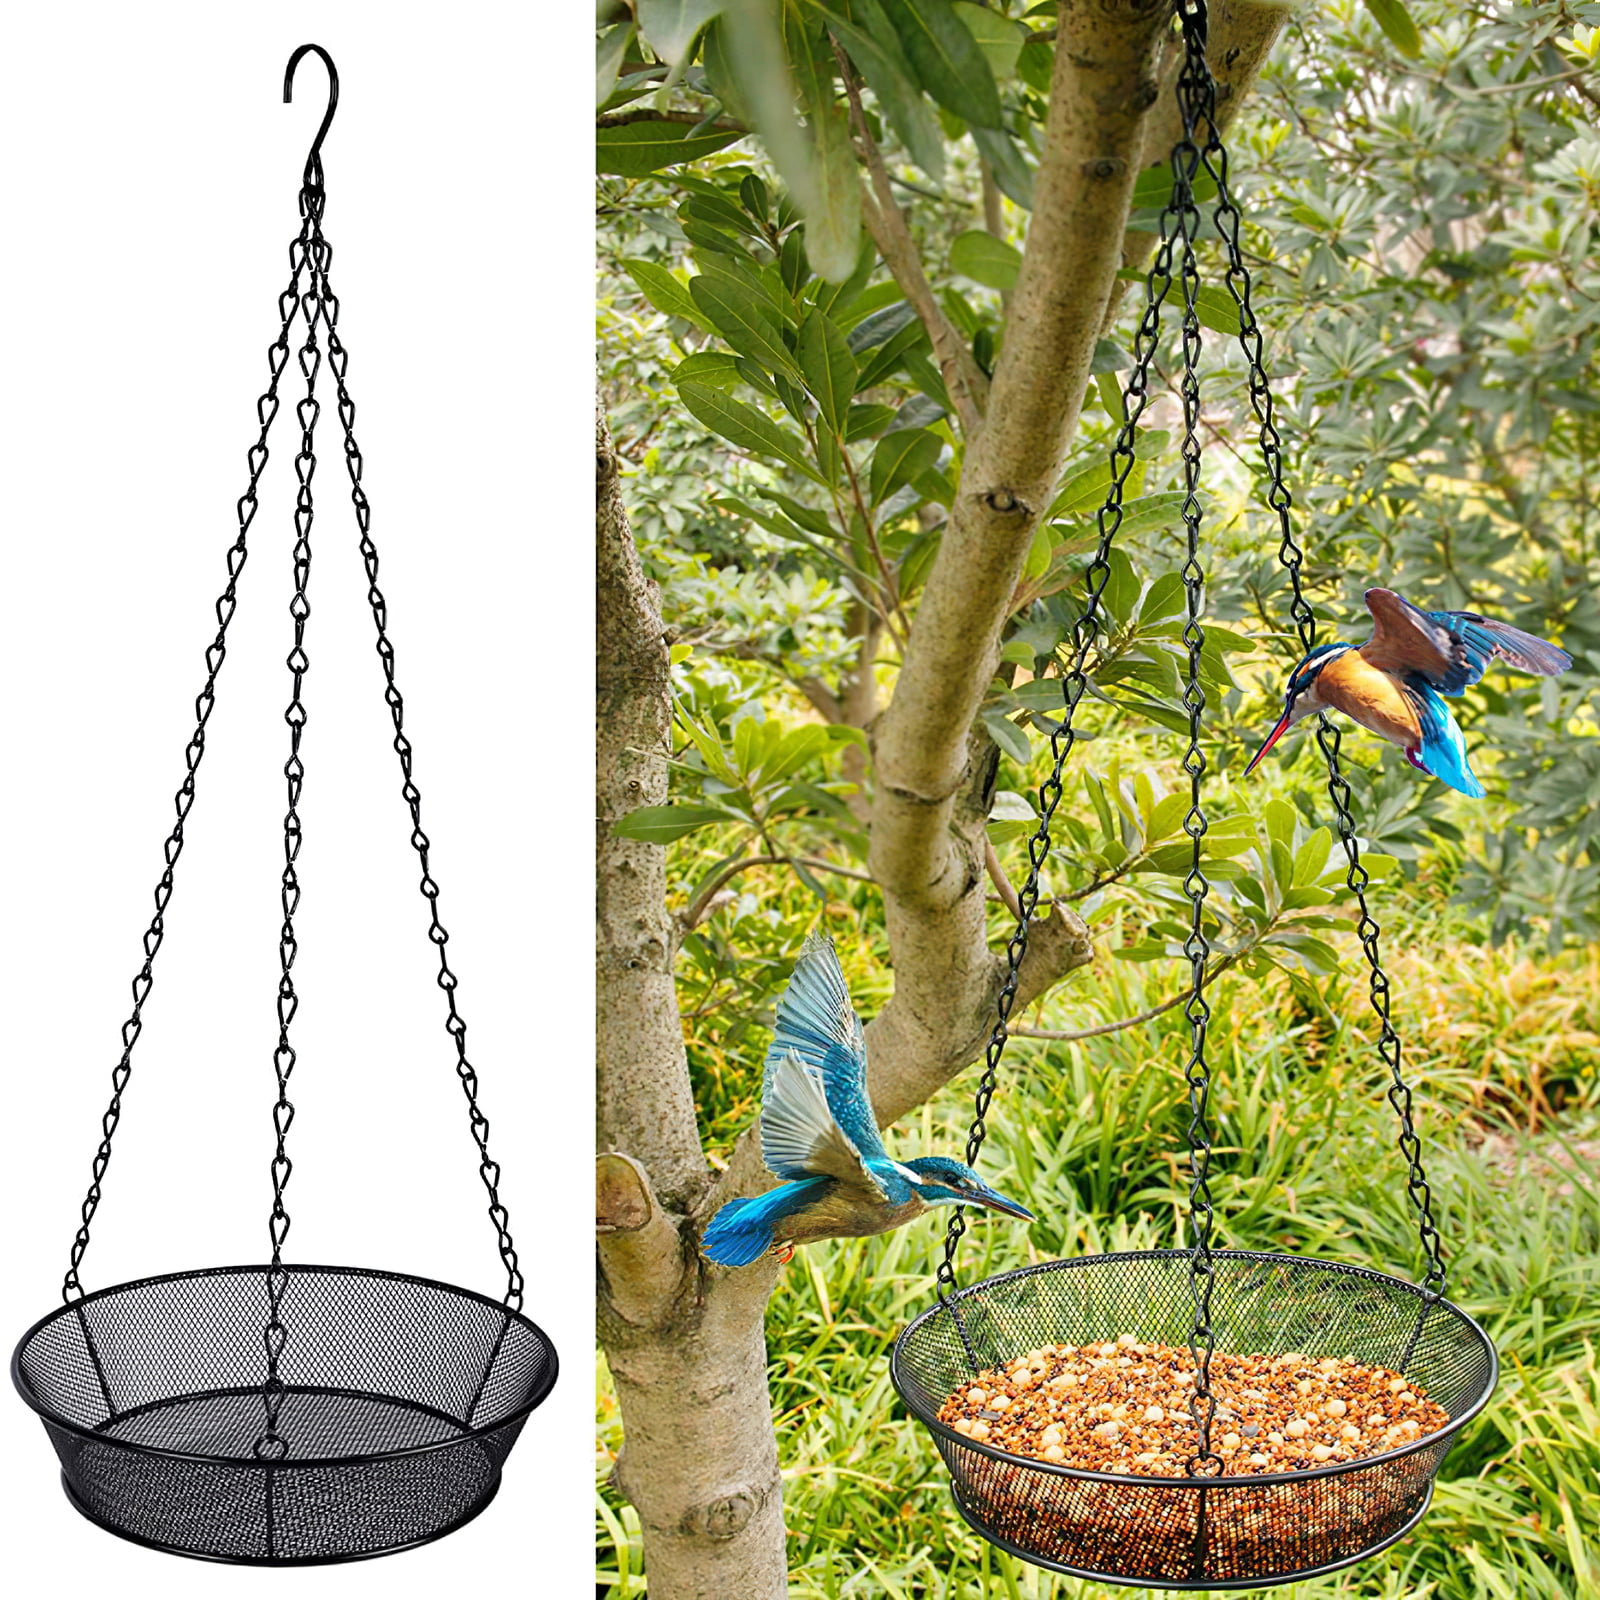 GB-6890 Hanging Bird Feeder Tray Strong Double-Loop Chains Steel Platform Dish 